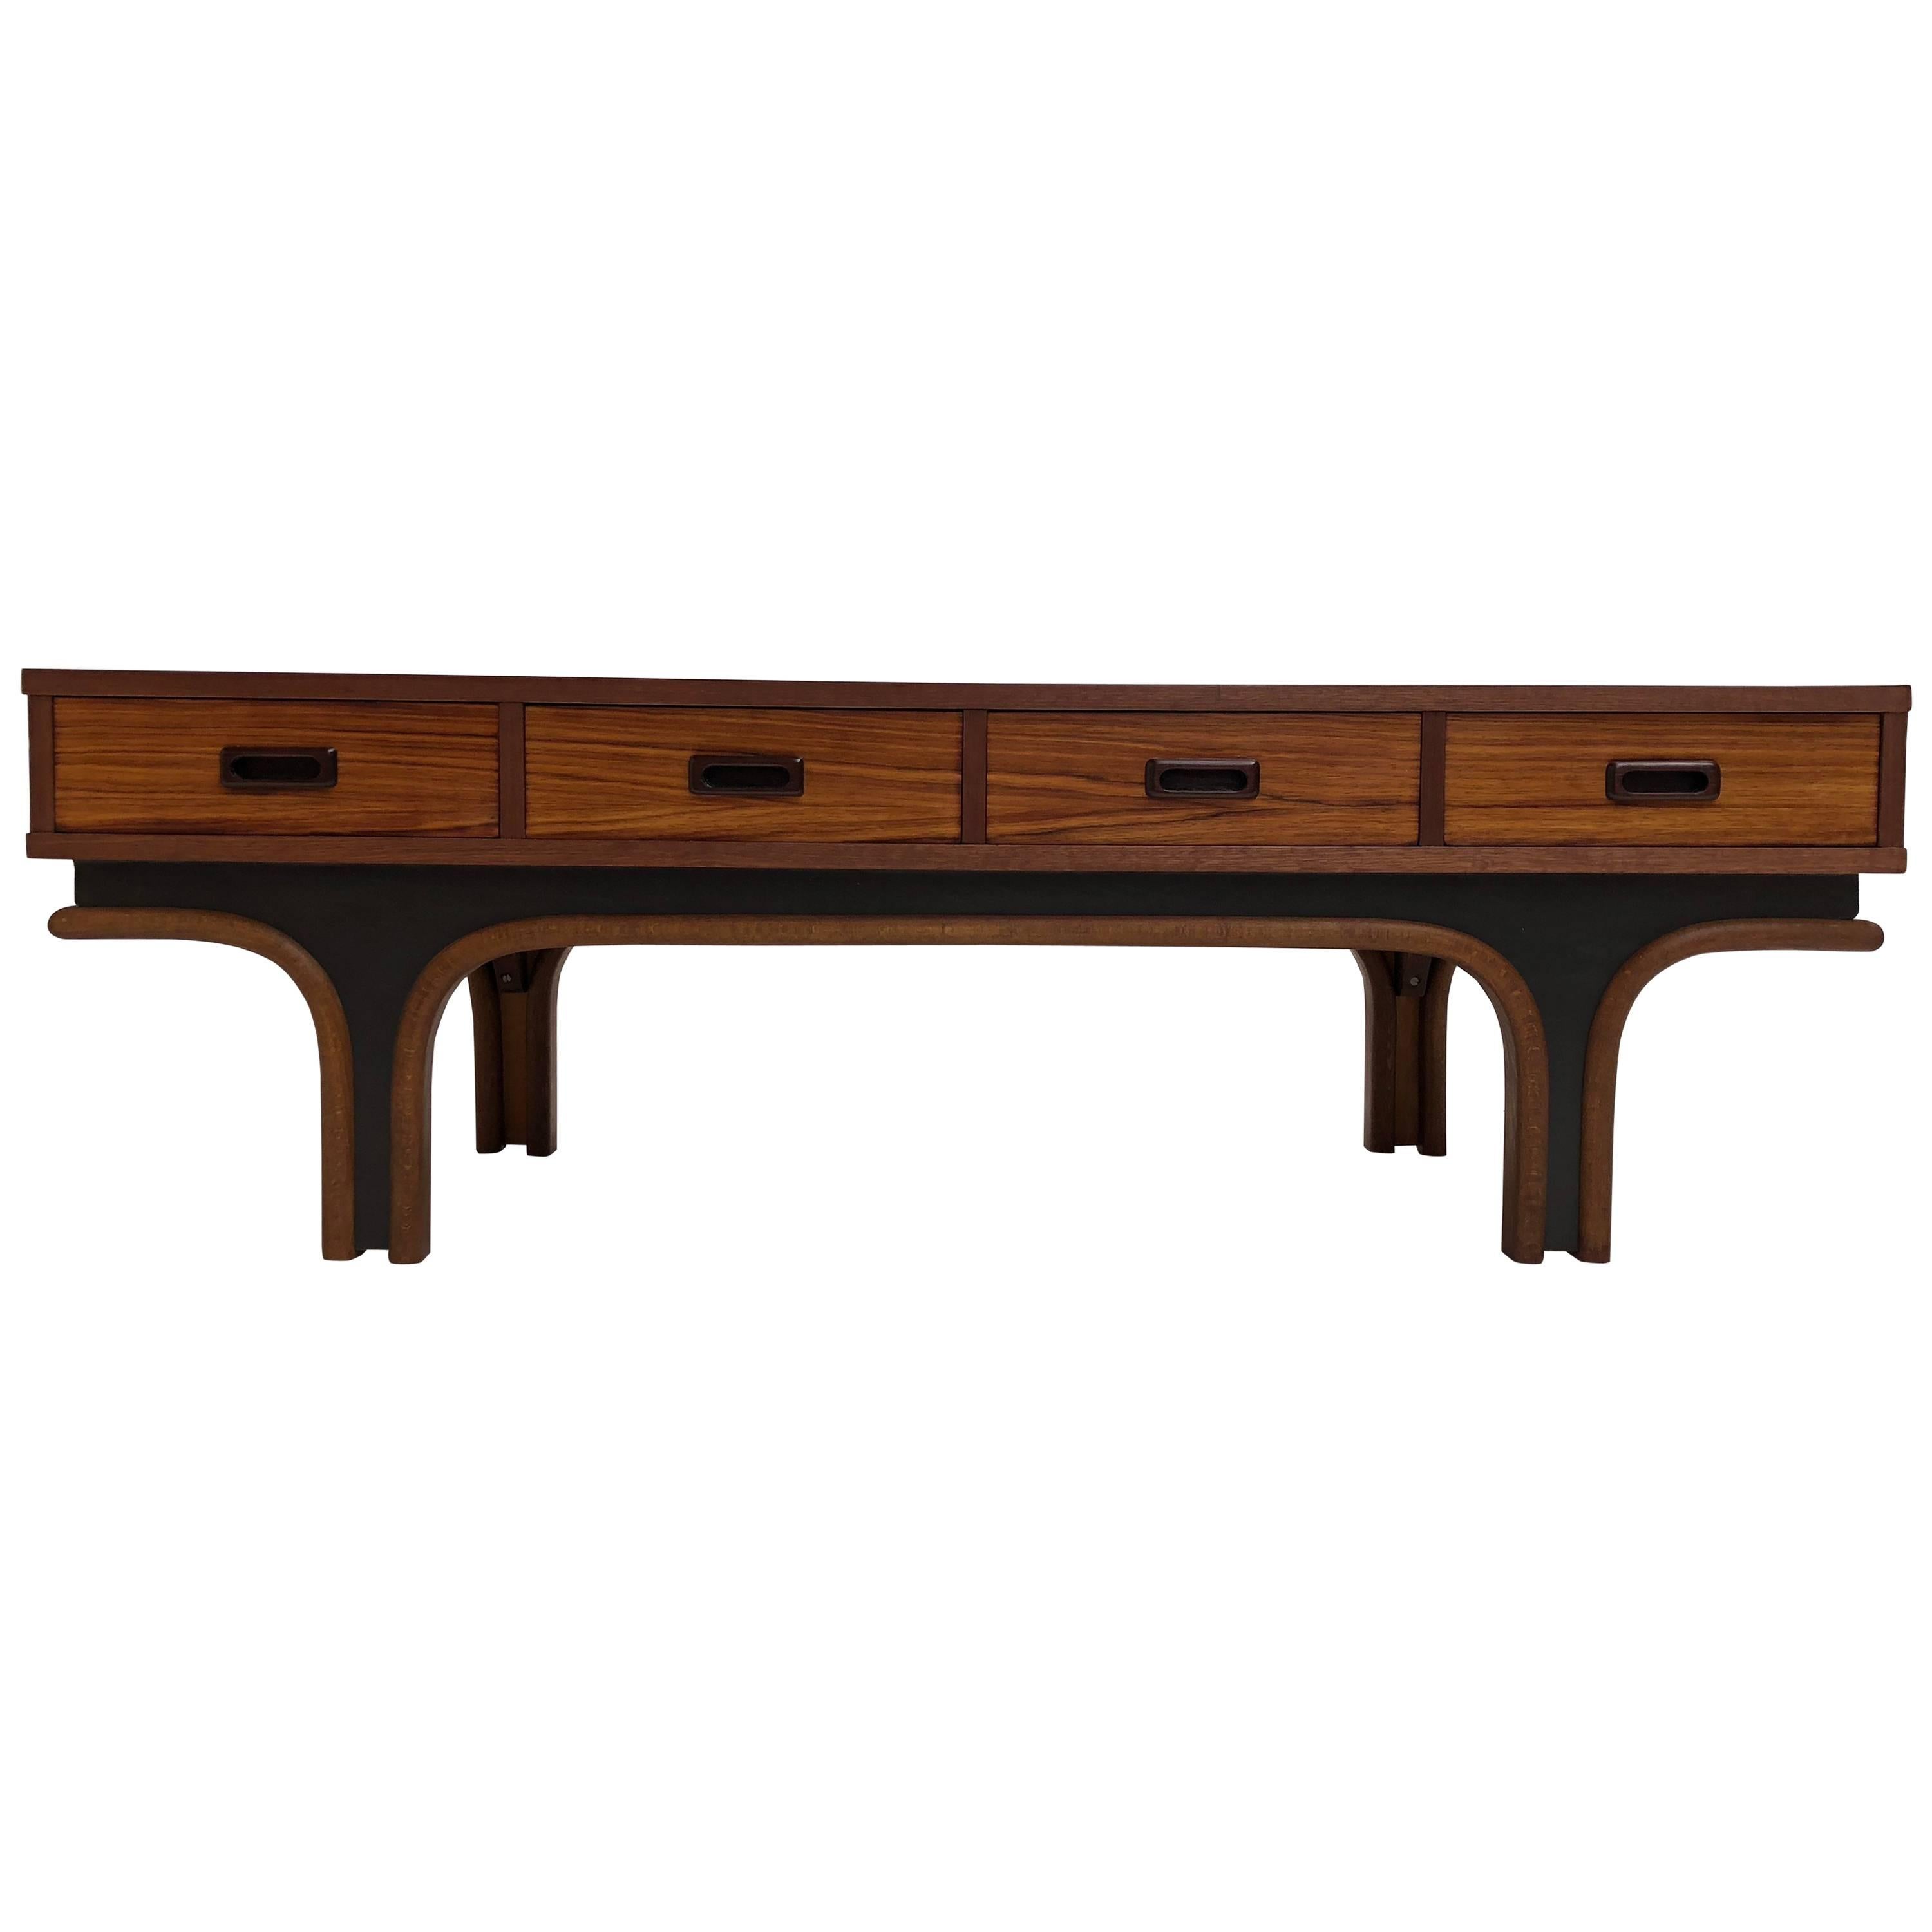 Gianfranco Frattini Style Low Table, Credenza in Mahogany, Birch & Leather 1960s